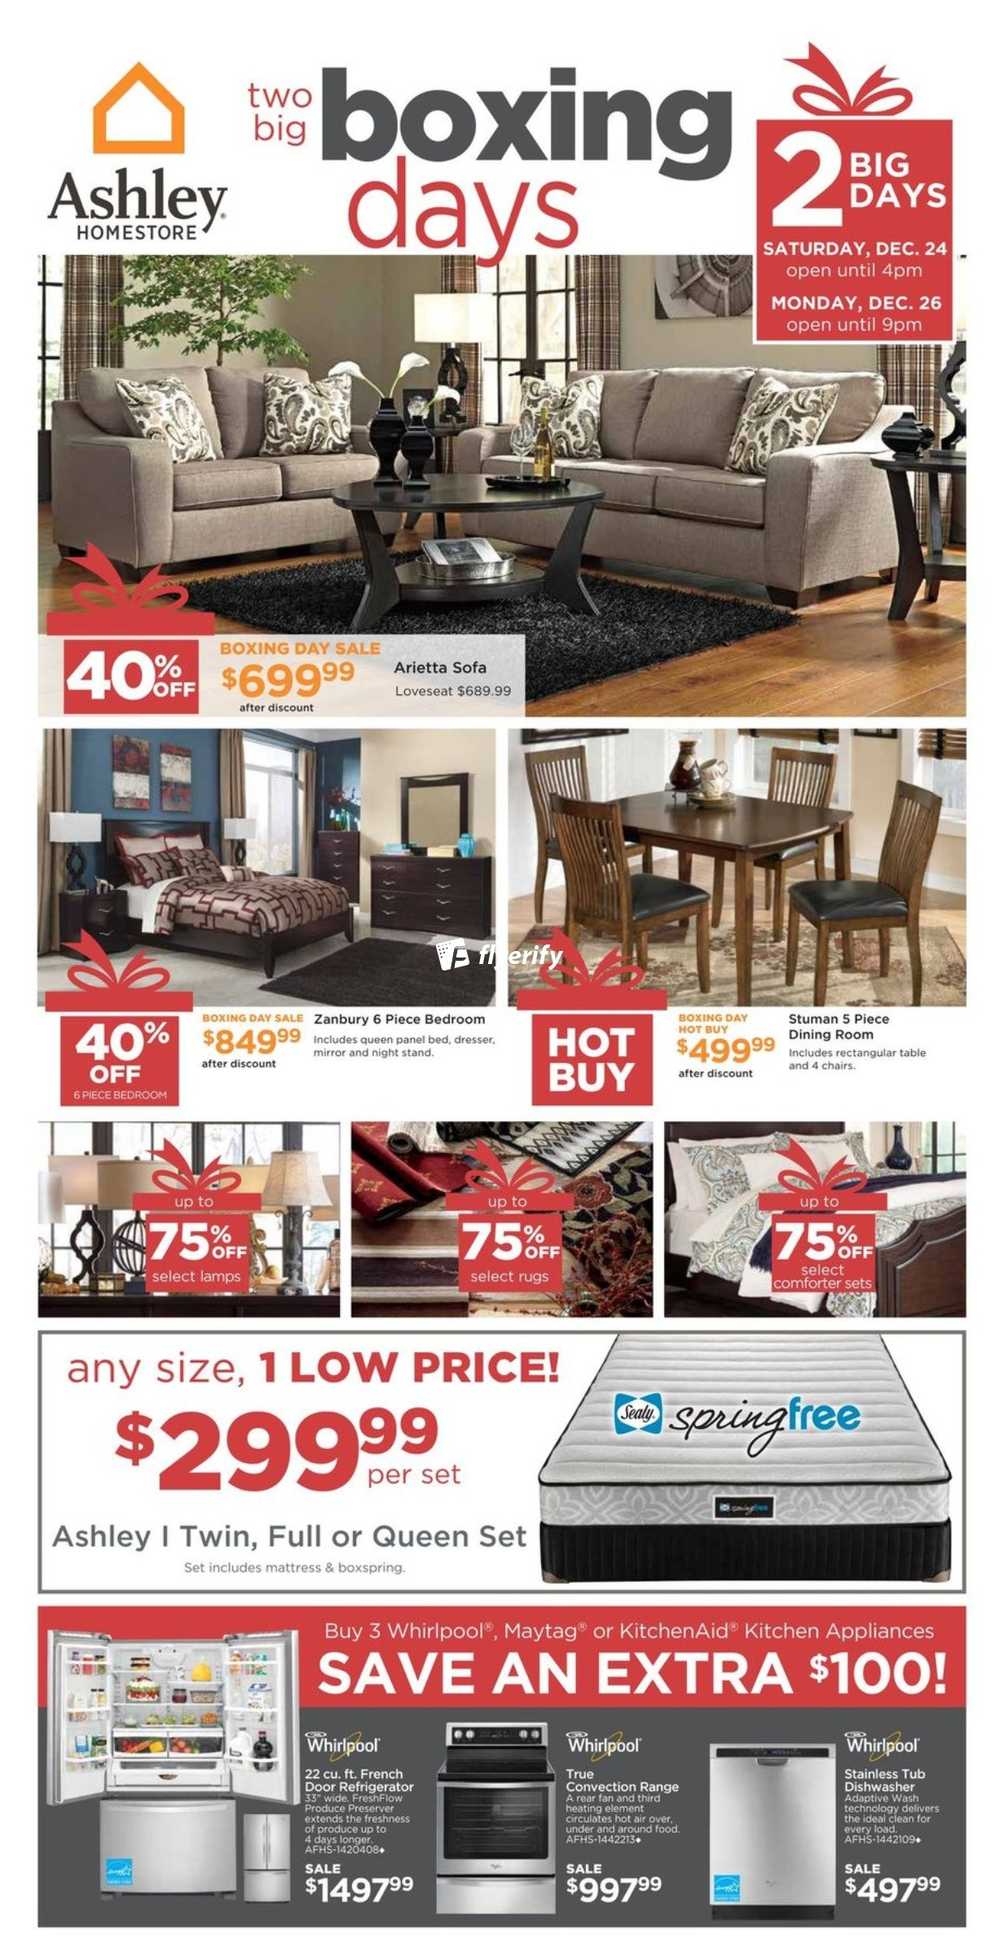 Ashley Homestore West Boxing Day Flyer December 24 26 Canada